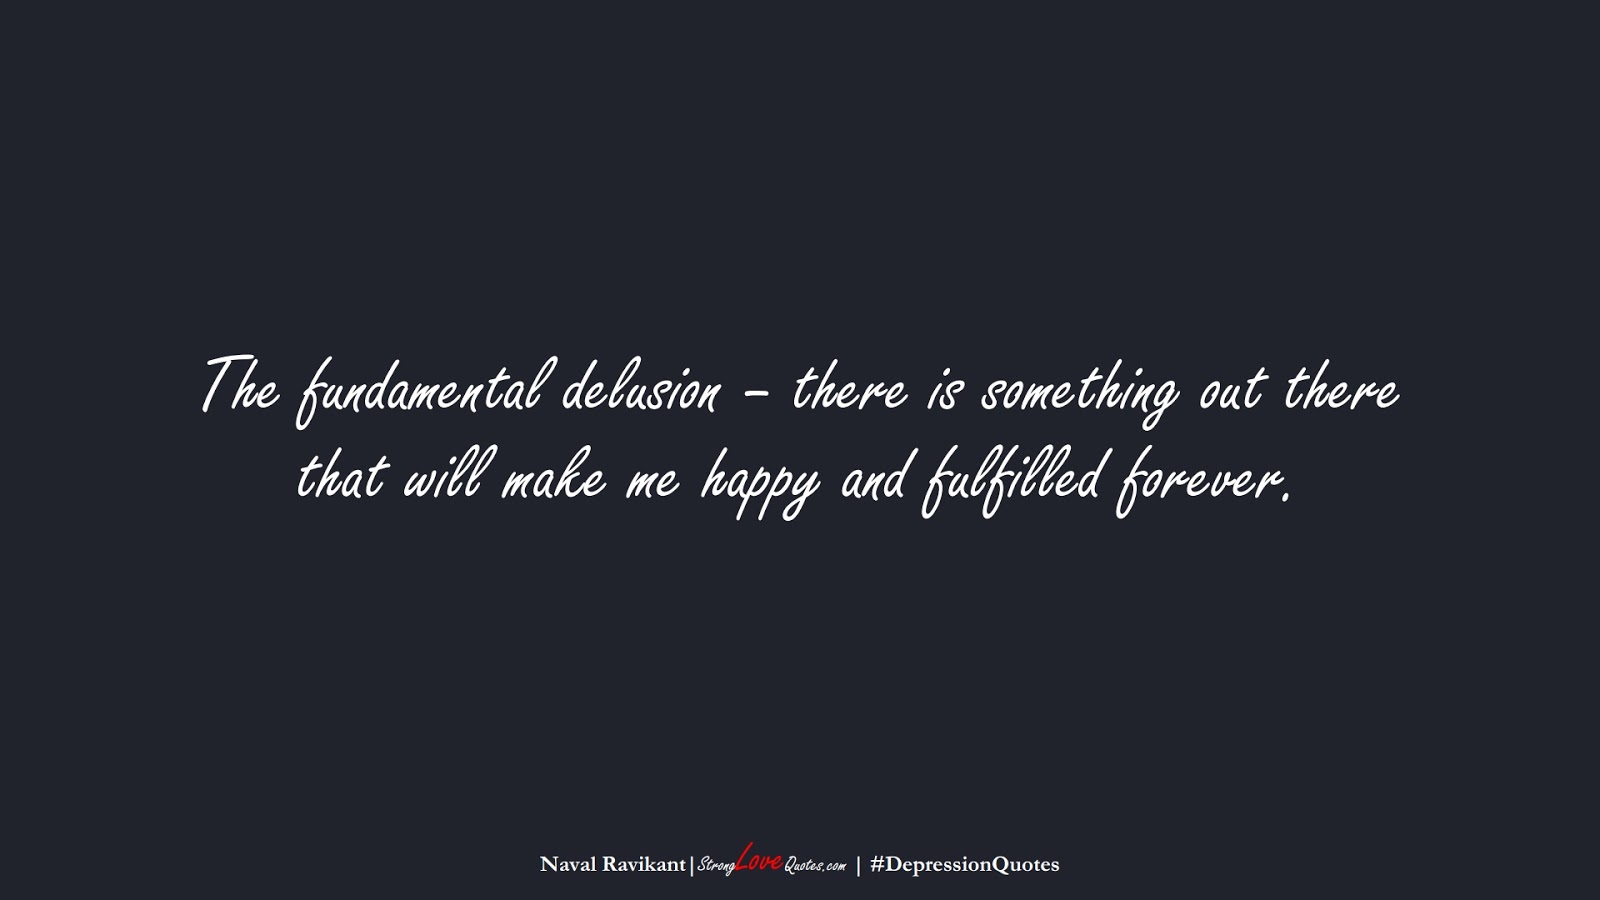 The fundamental delusion – there is something out there that will make me happy and fulfilled forever. (Naval Ravikant);  #DepressionQuotes